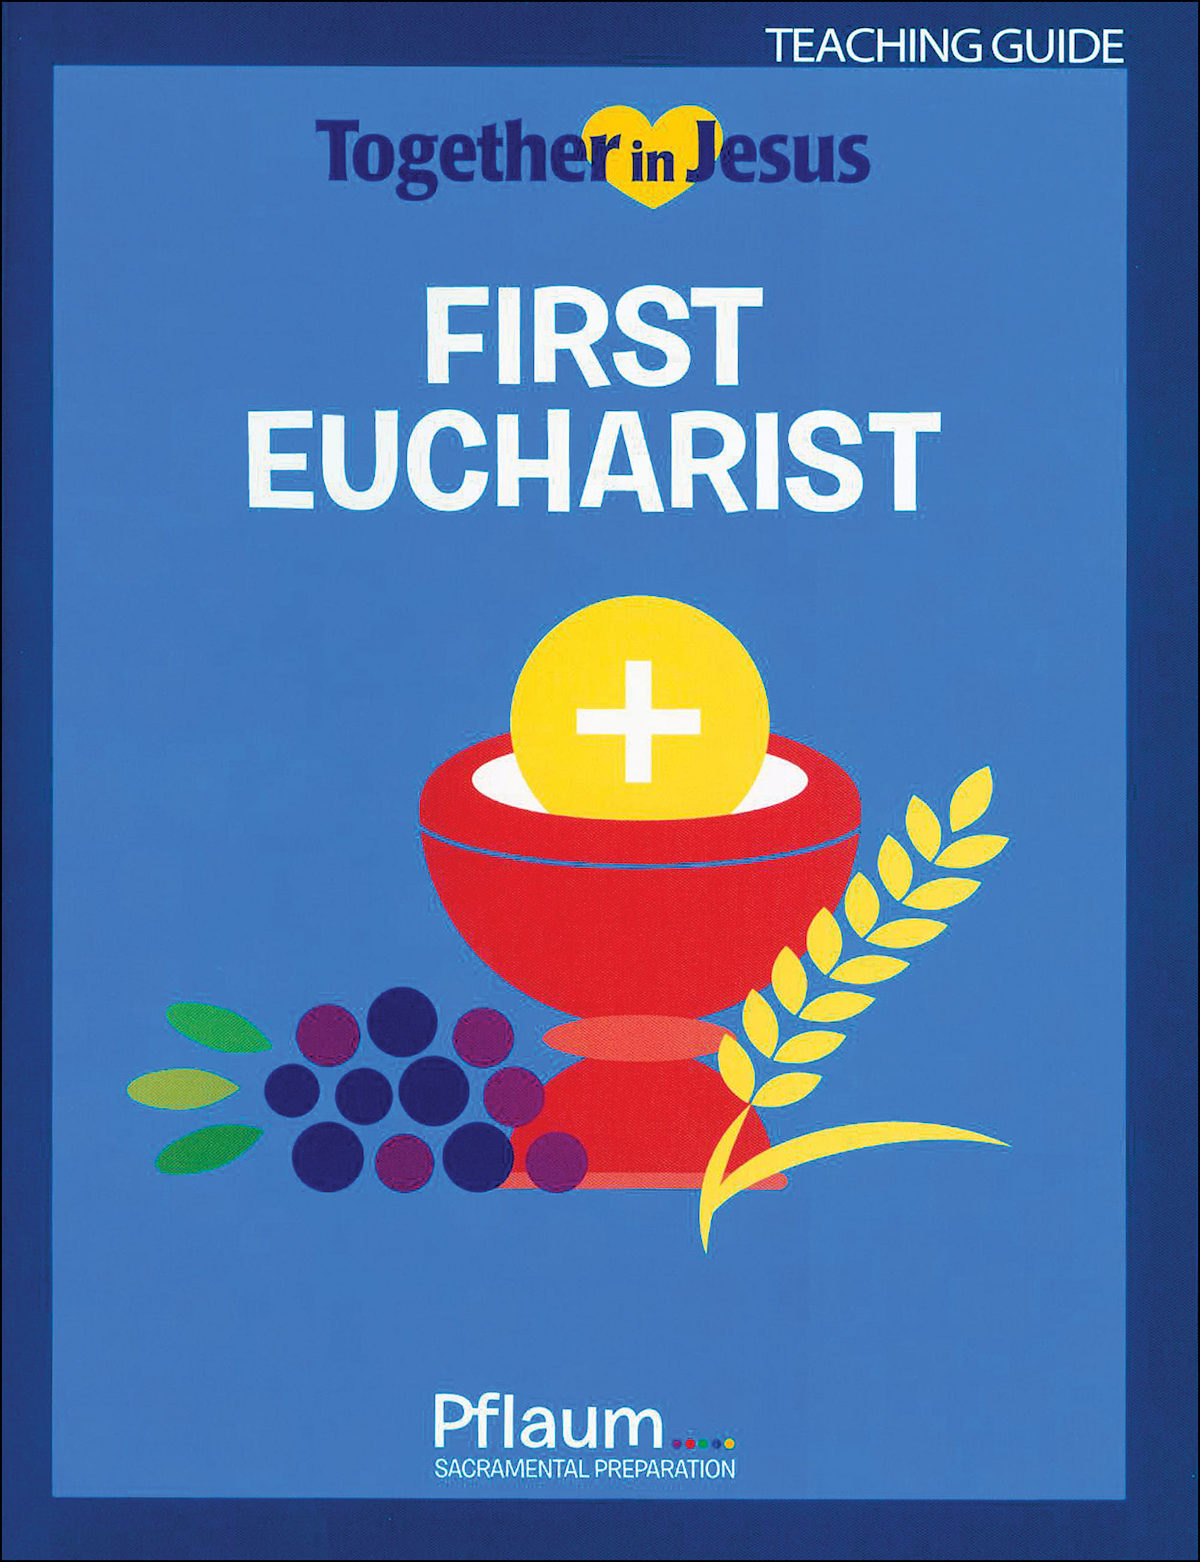 Together in Jesus First Eucharist 2018 Teaching Guide